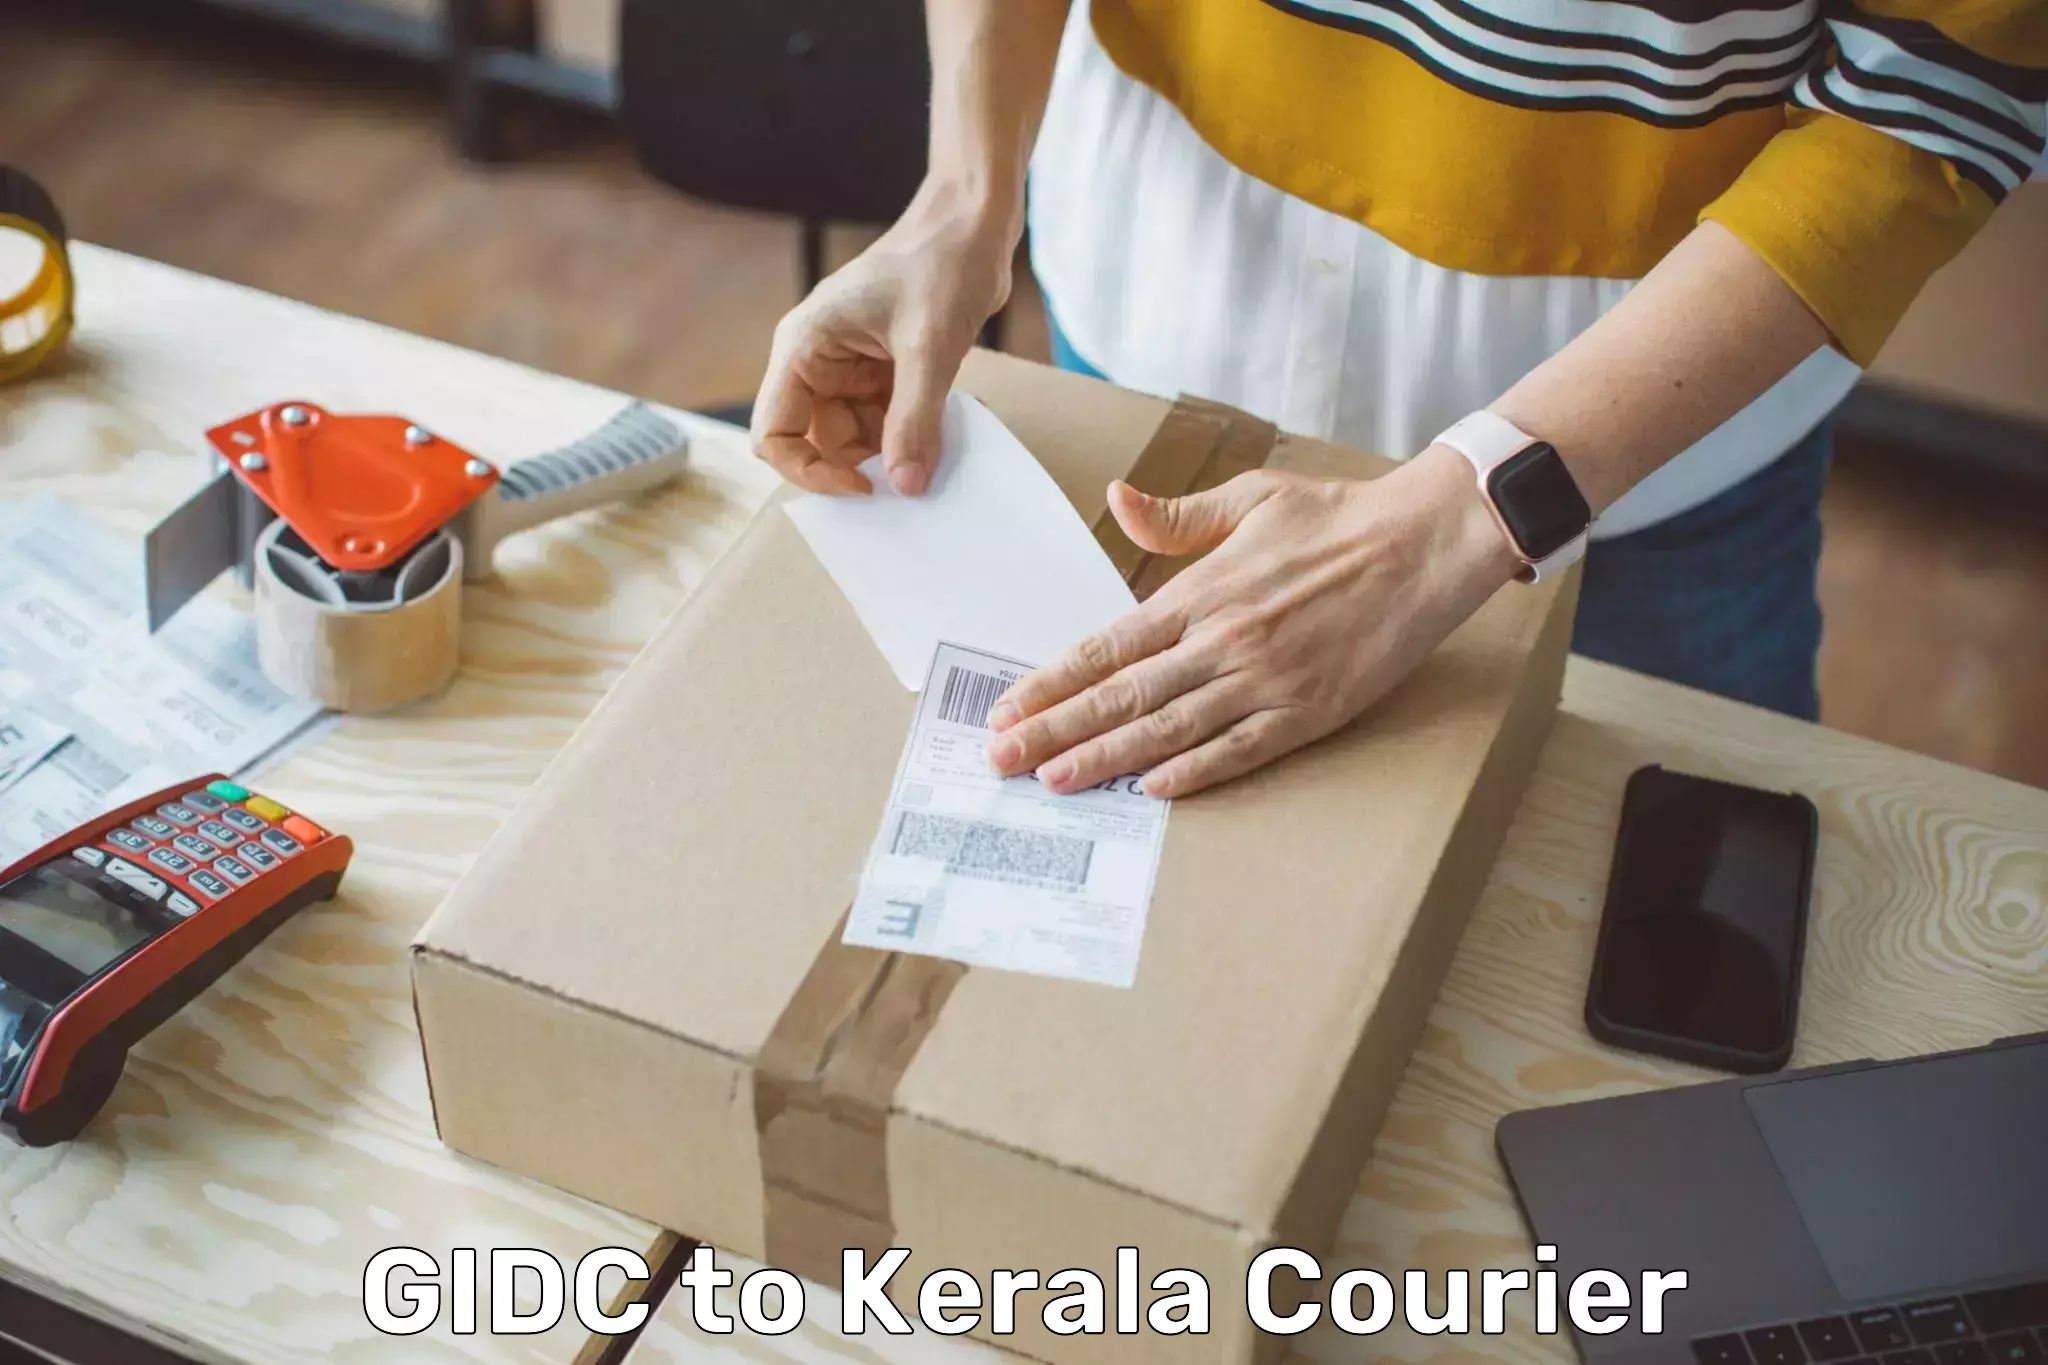 Global courier networks GIDC to Kerala